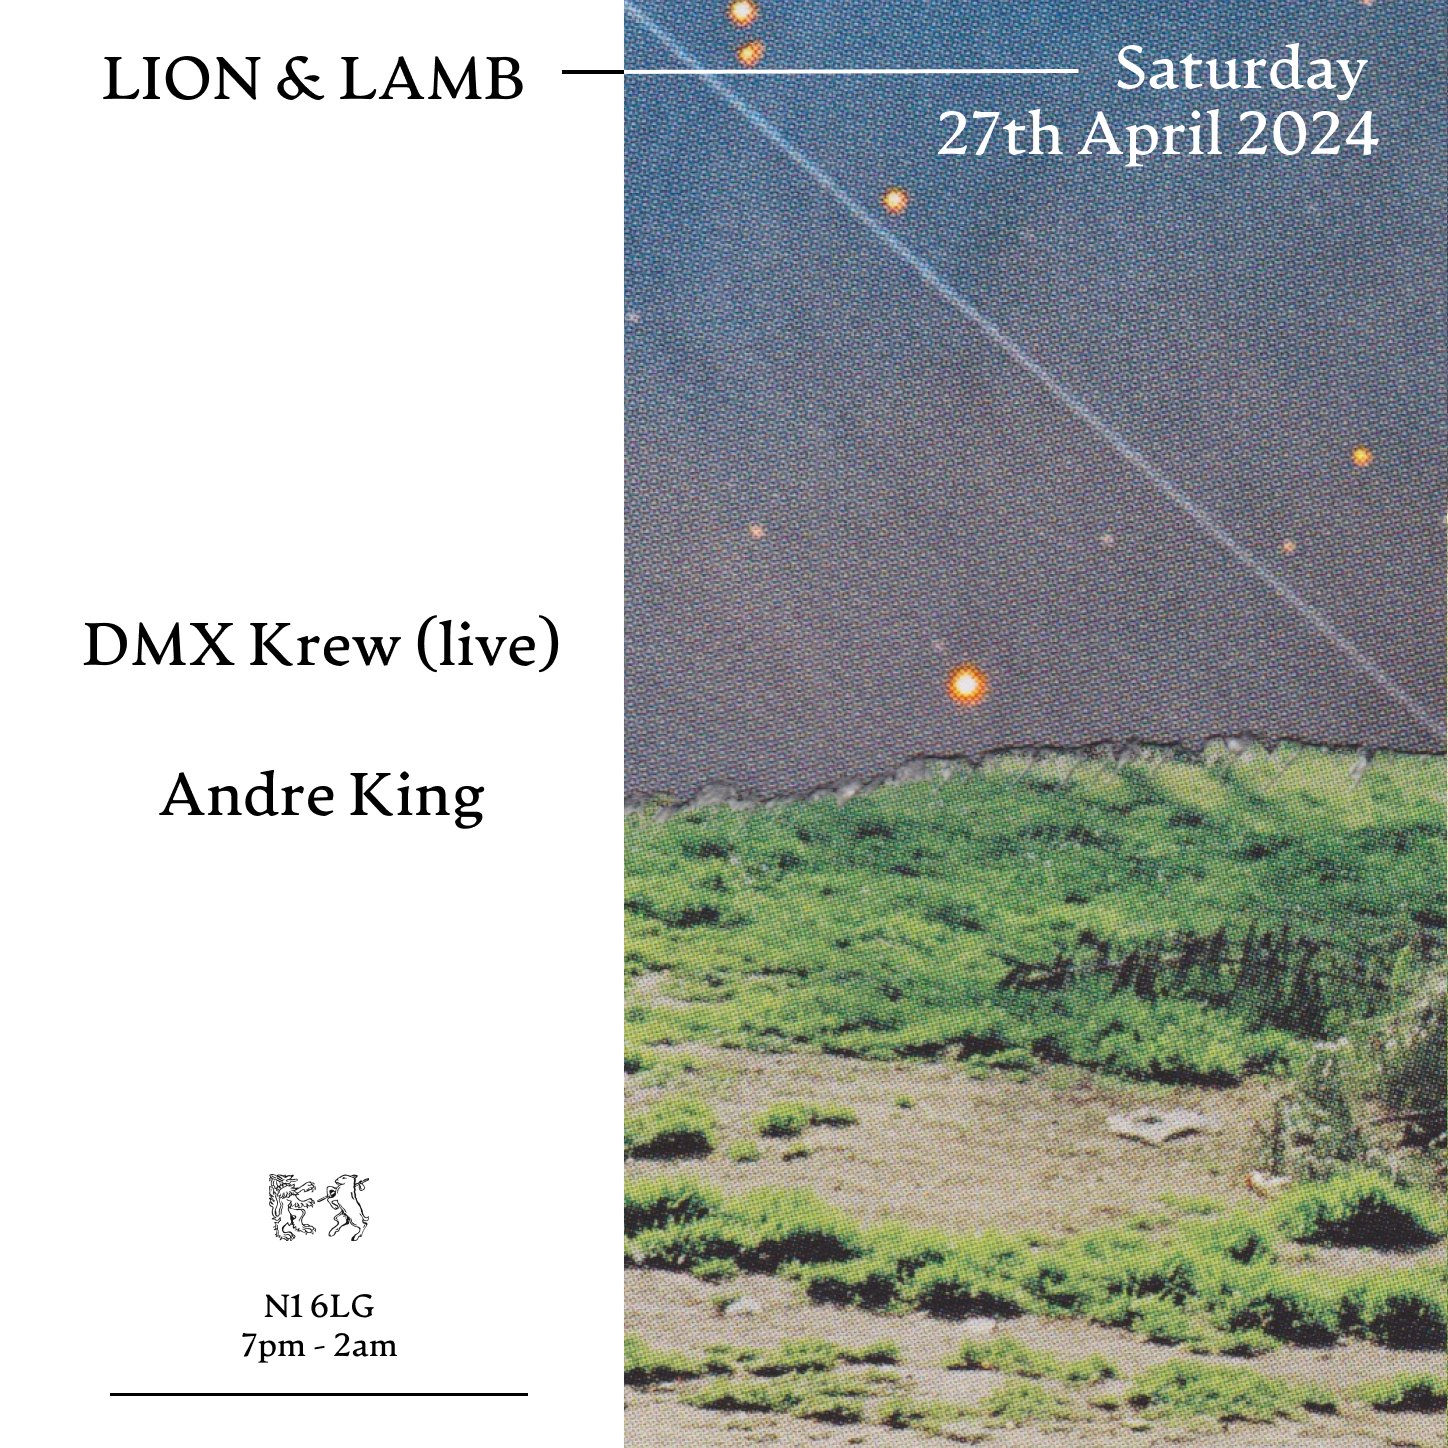 Lion & Lamb with DMX Krew + Andre King - フライヤー表